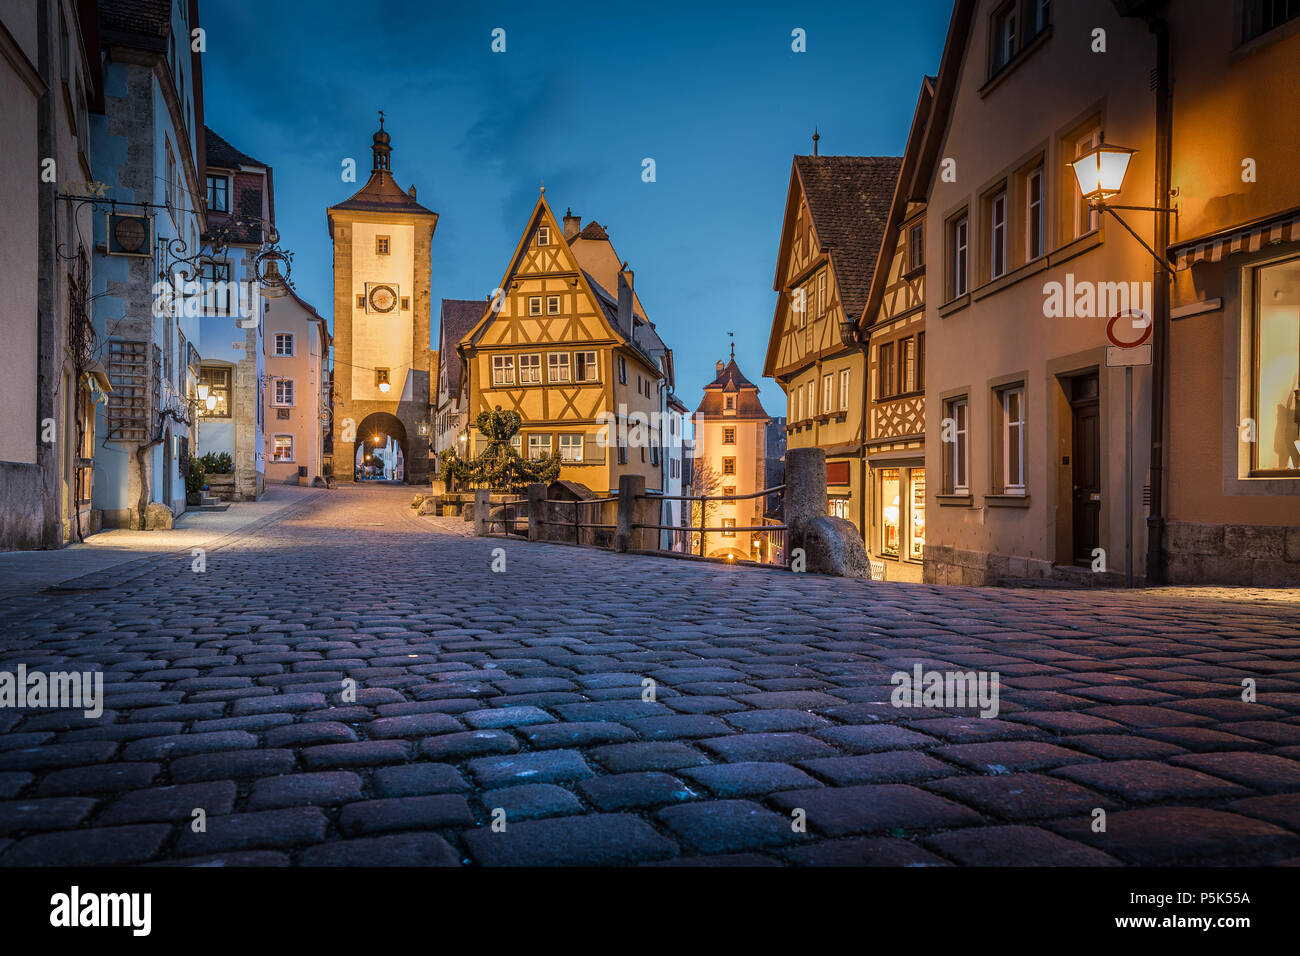 Classic view of the medieval town of Rothenburg ob der Tauber illuminated in beautiful evening twilight during blue hour at dusk, Bavaria, Germany Stock Photo